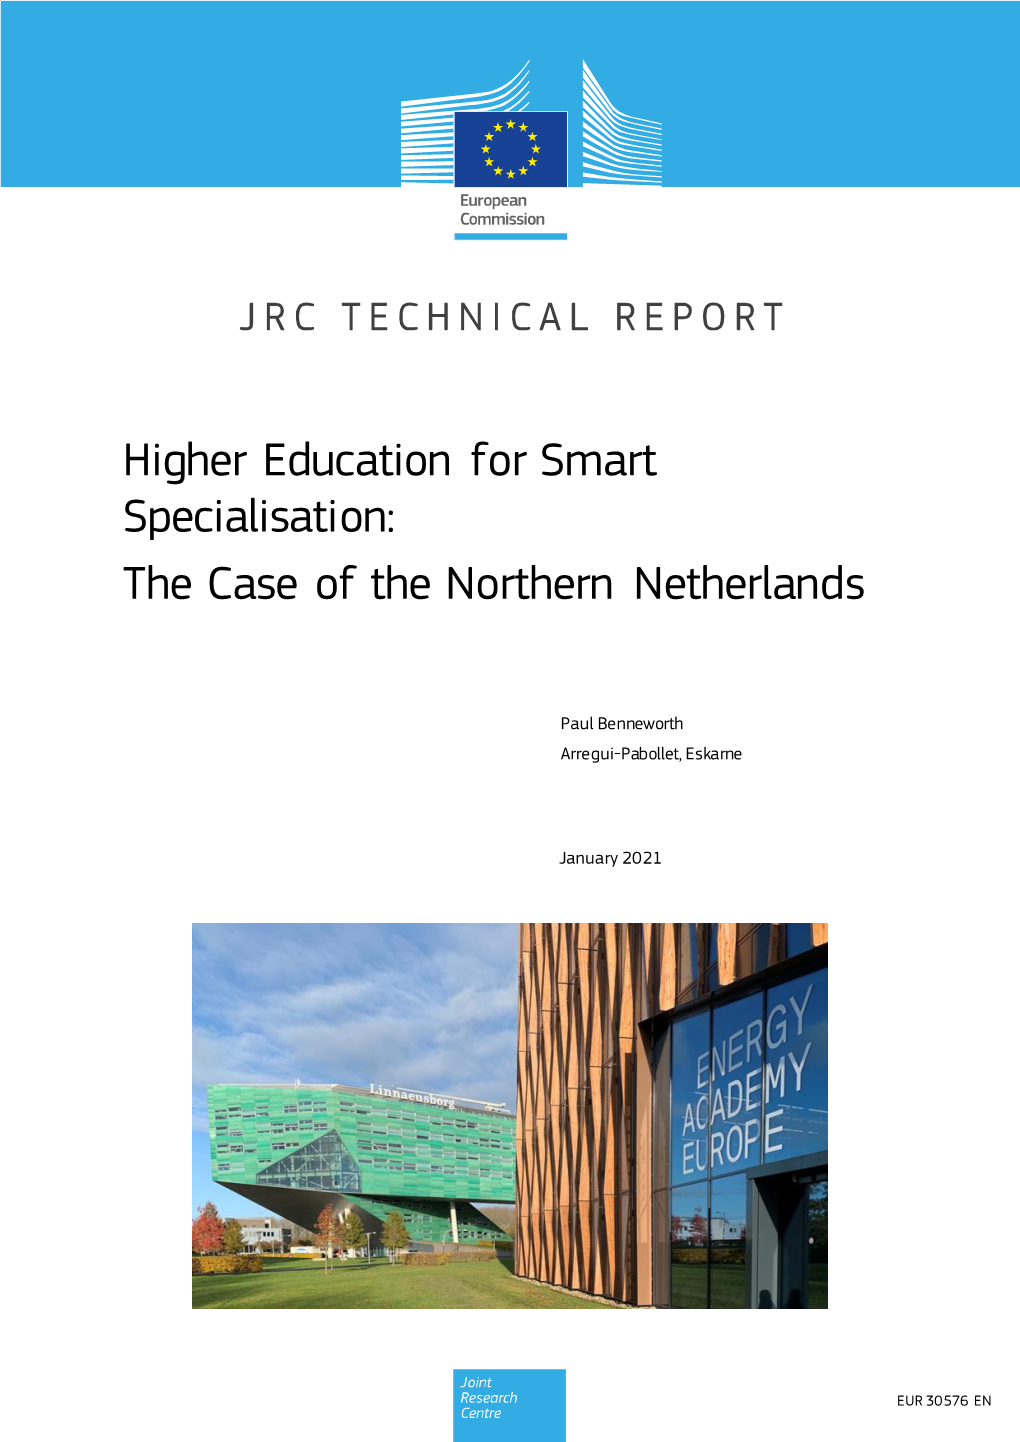 Higher Education for Smart Specialisation: the Case of the Northern Netherlands